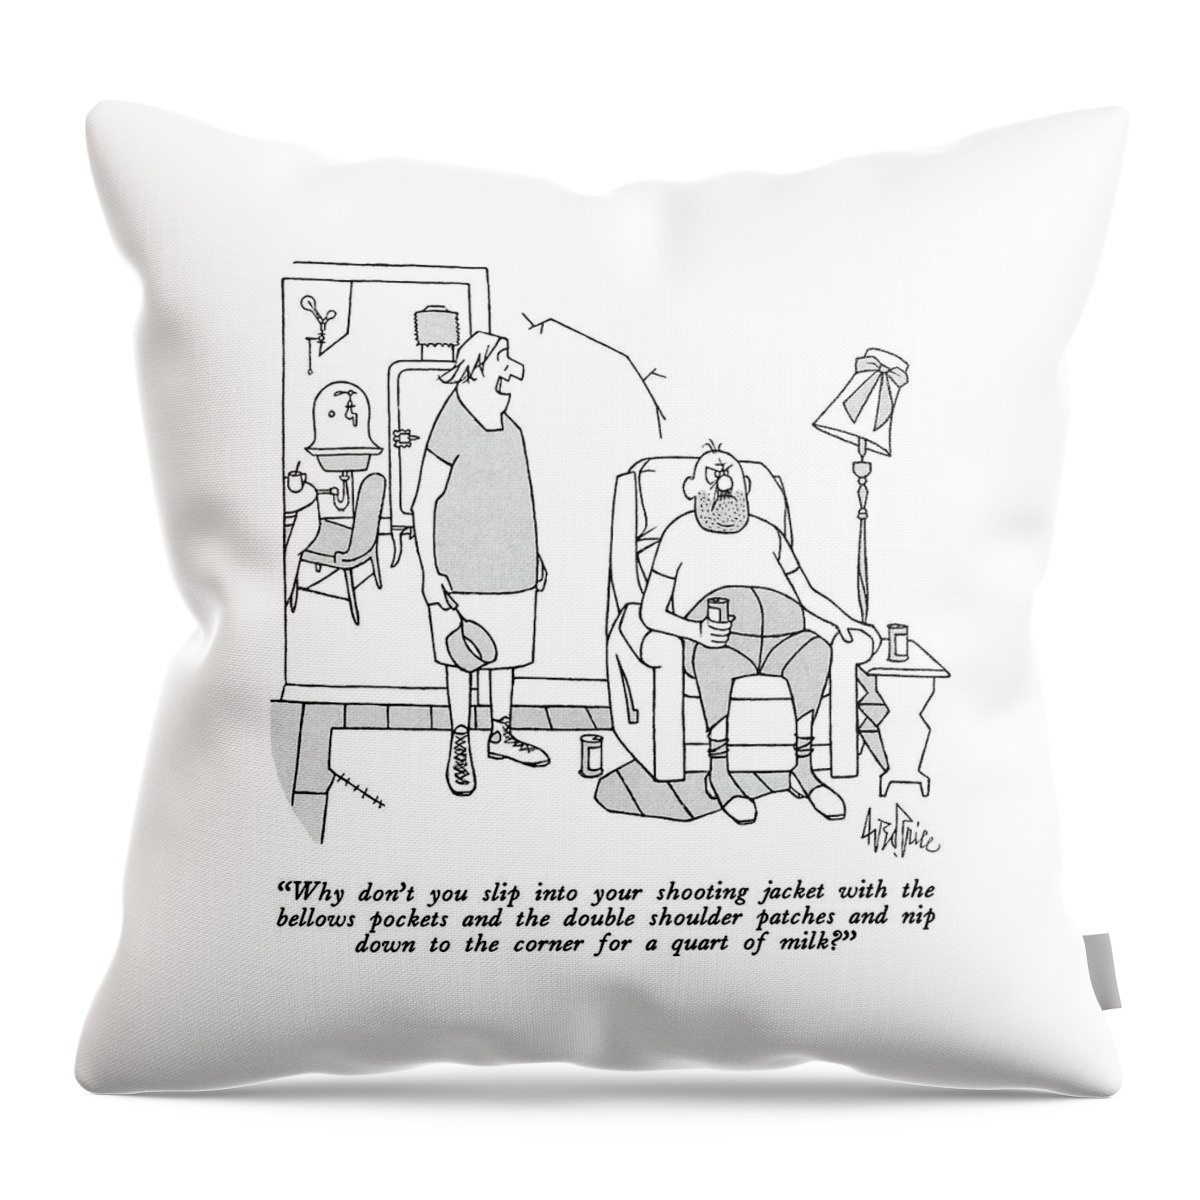 Why Don't You Slip Into Your Shooting Jacket Throw Pillow